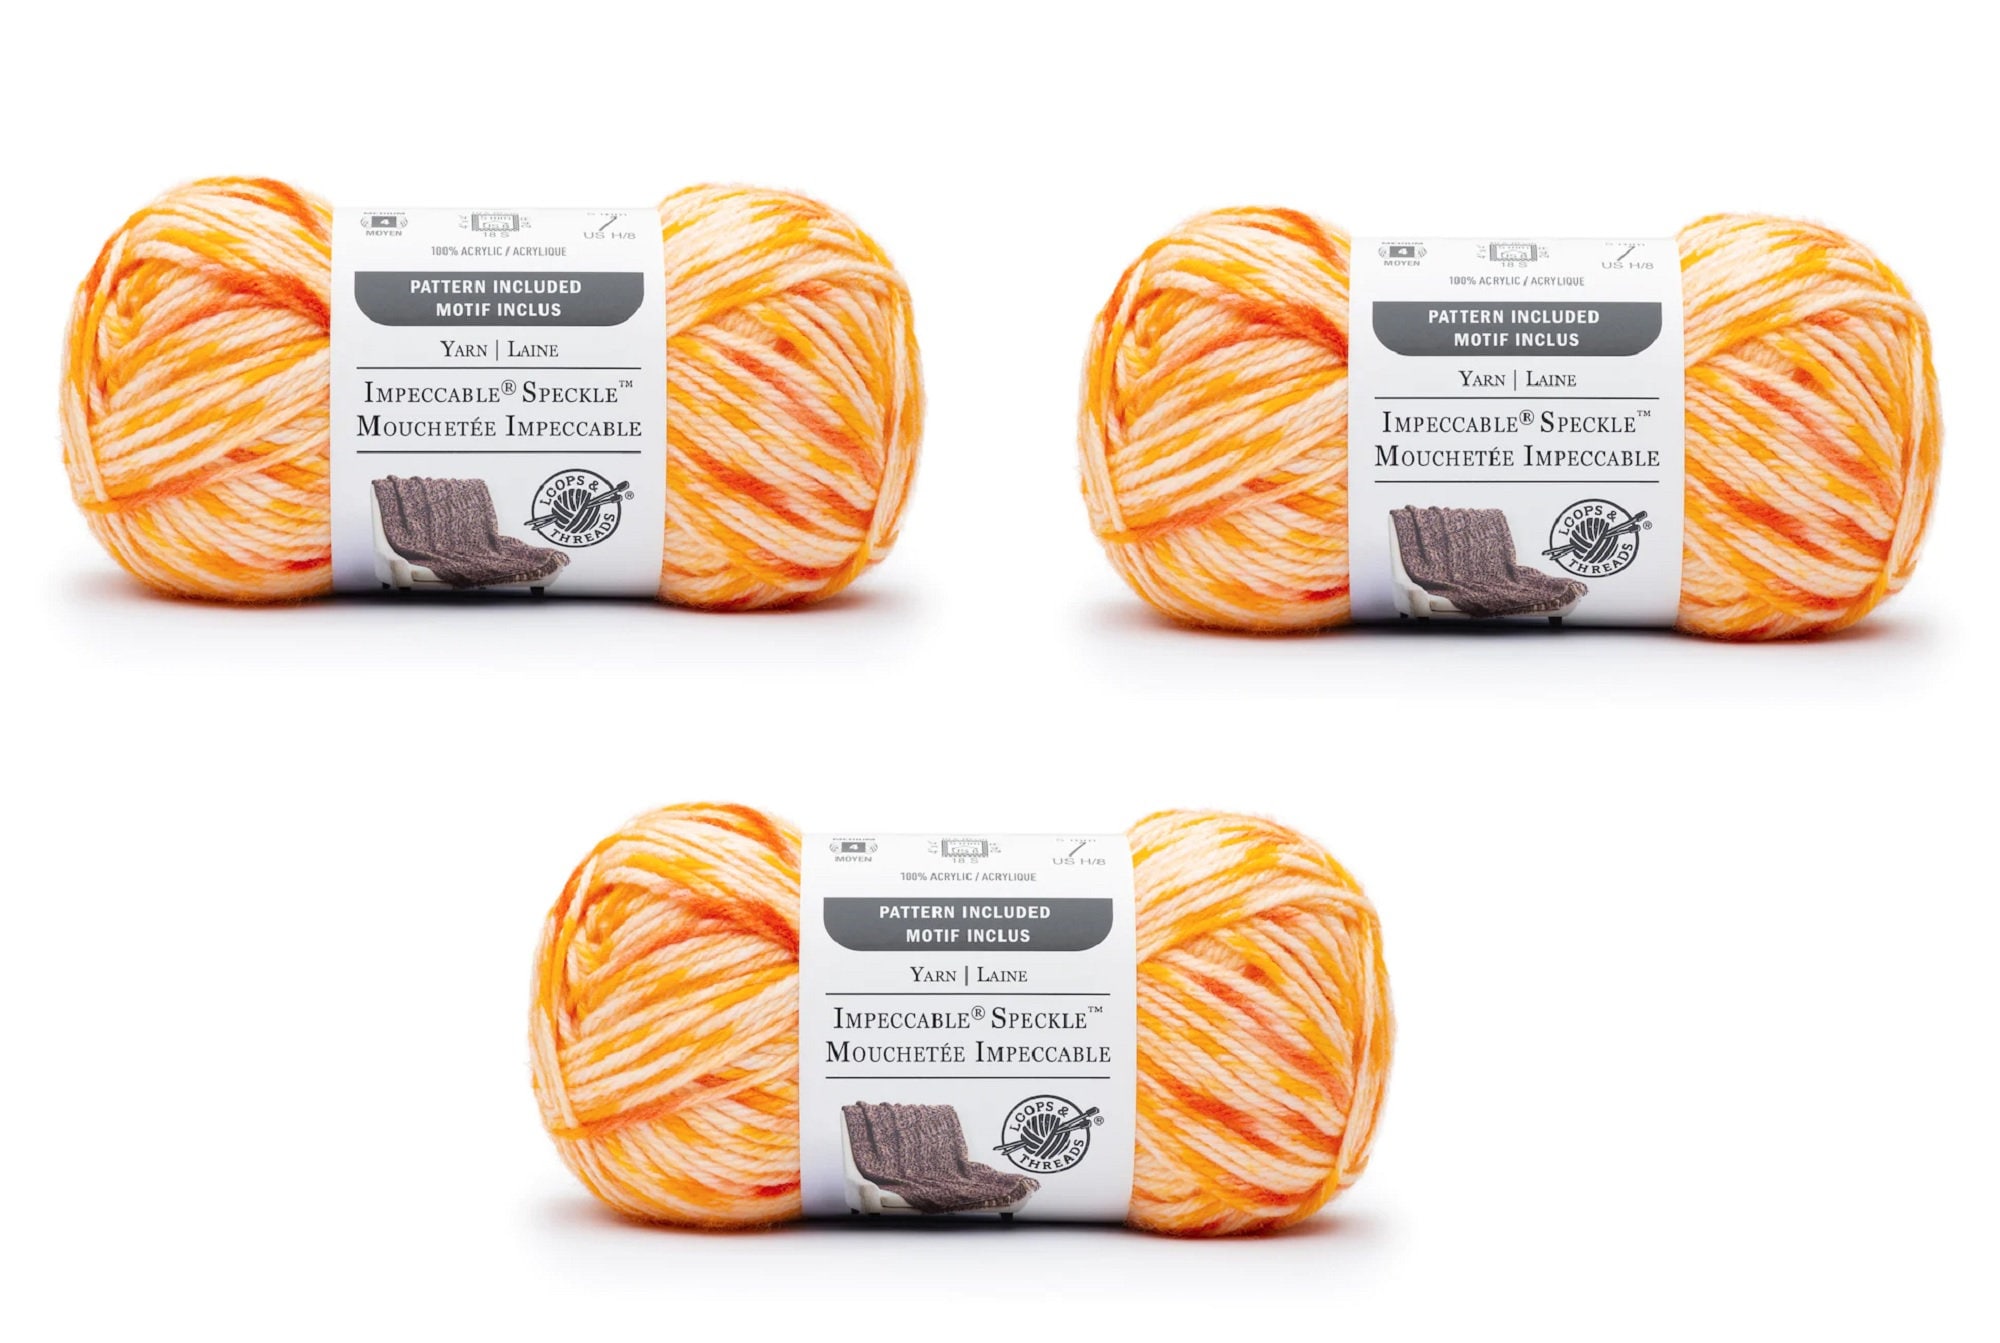 Loops & Threads Impeccable Speckle Yarn - 3 oz